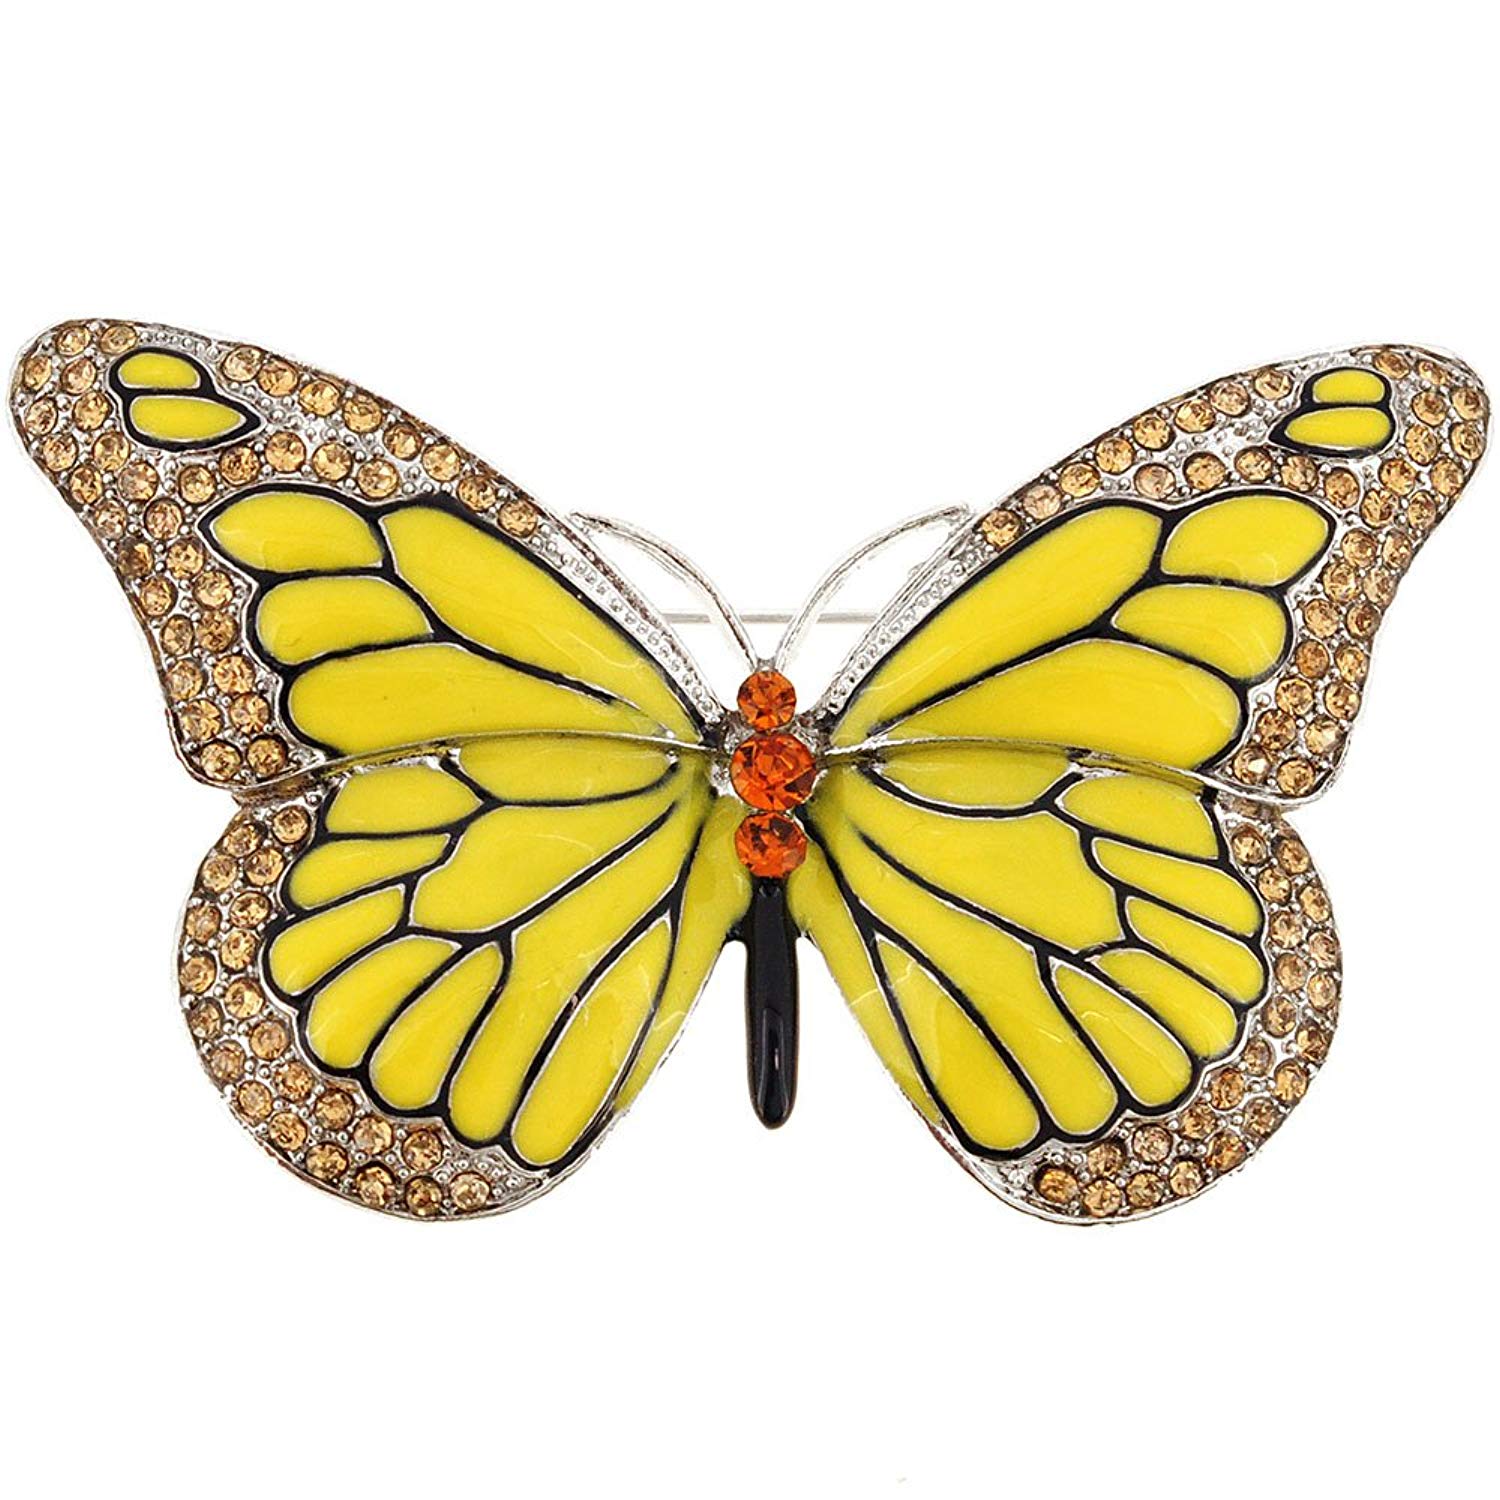 Amazon.com: Yellow Monarch Butterfly Crystal Pin Brooch: Jewelry